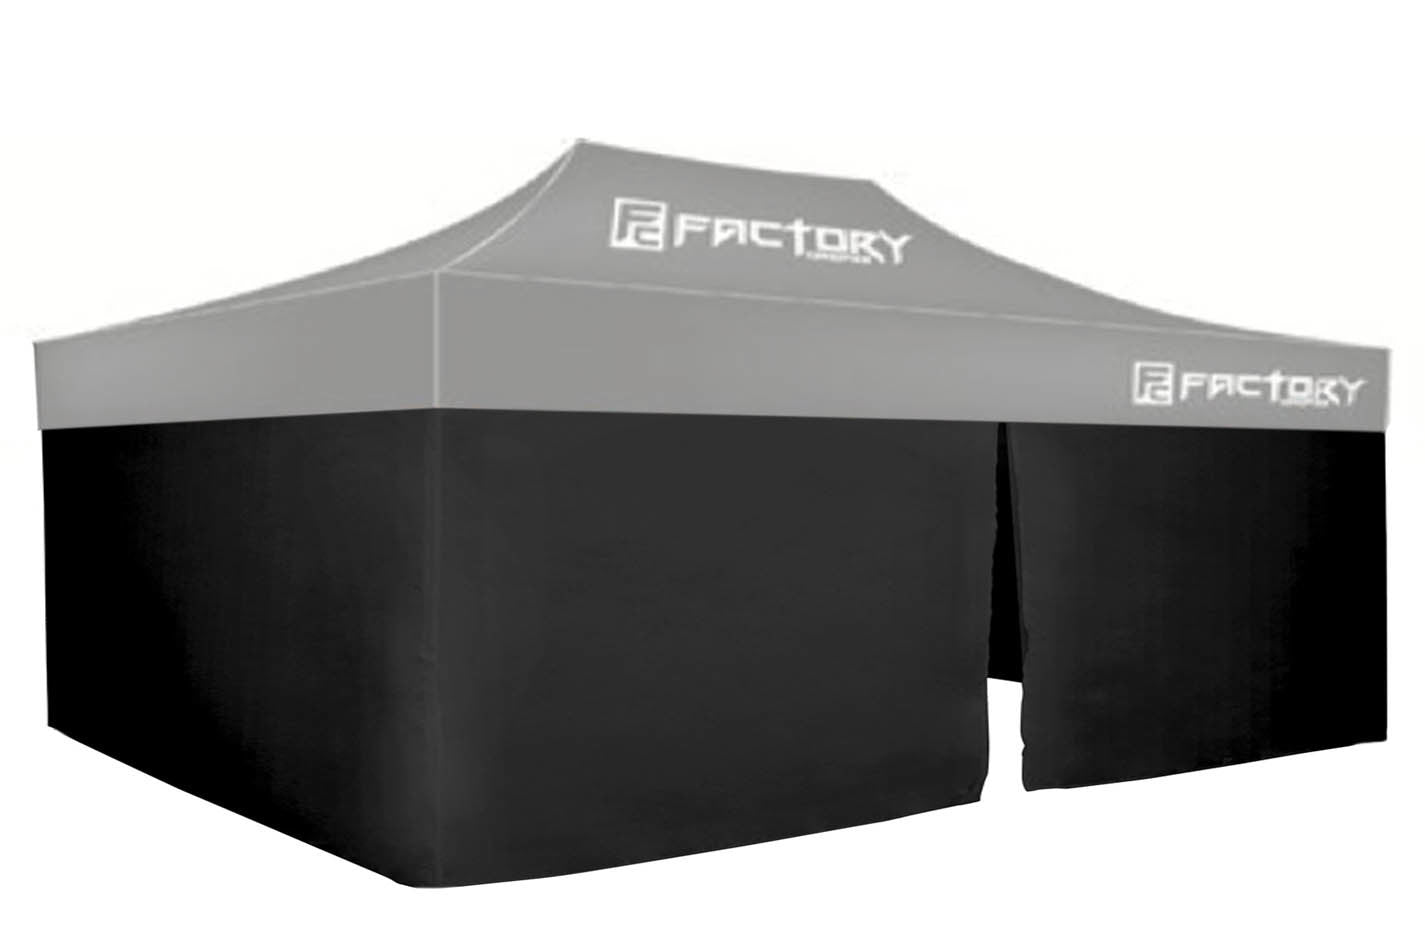 Factory Canopies Wall Kit Black 10ft x 20ft Canopy FAC42001-KIT